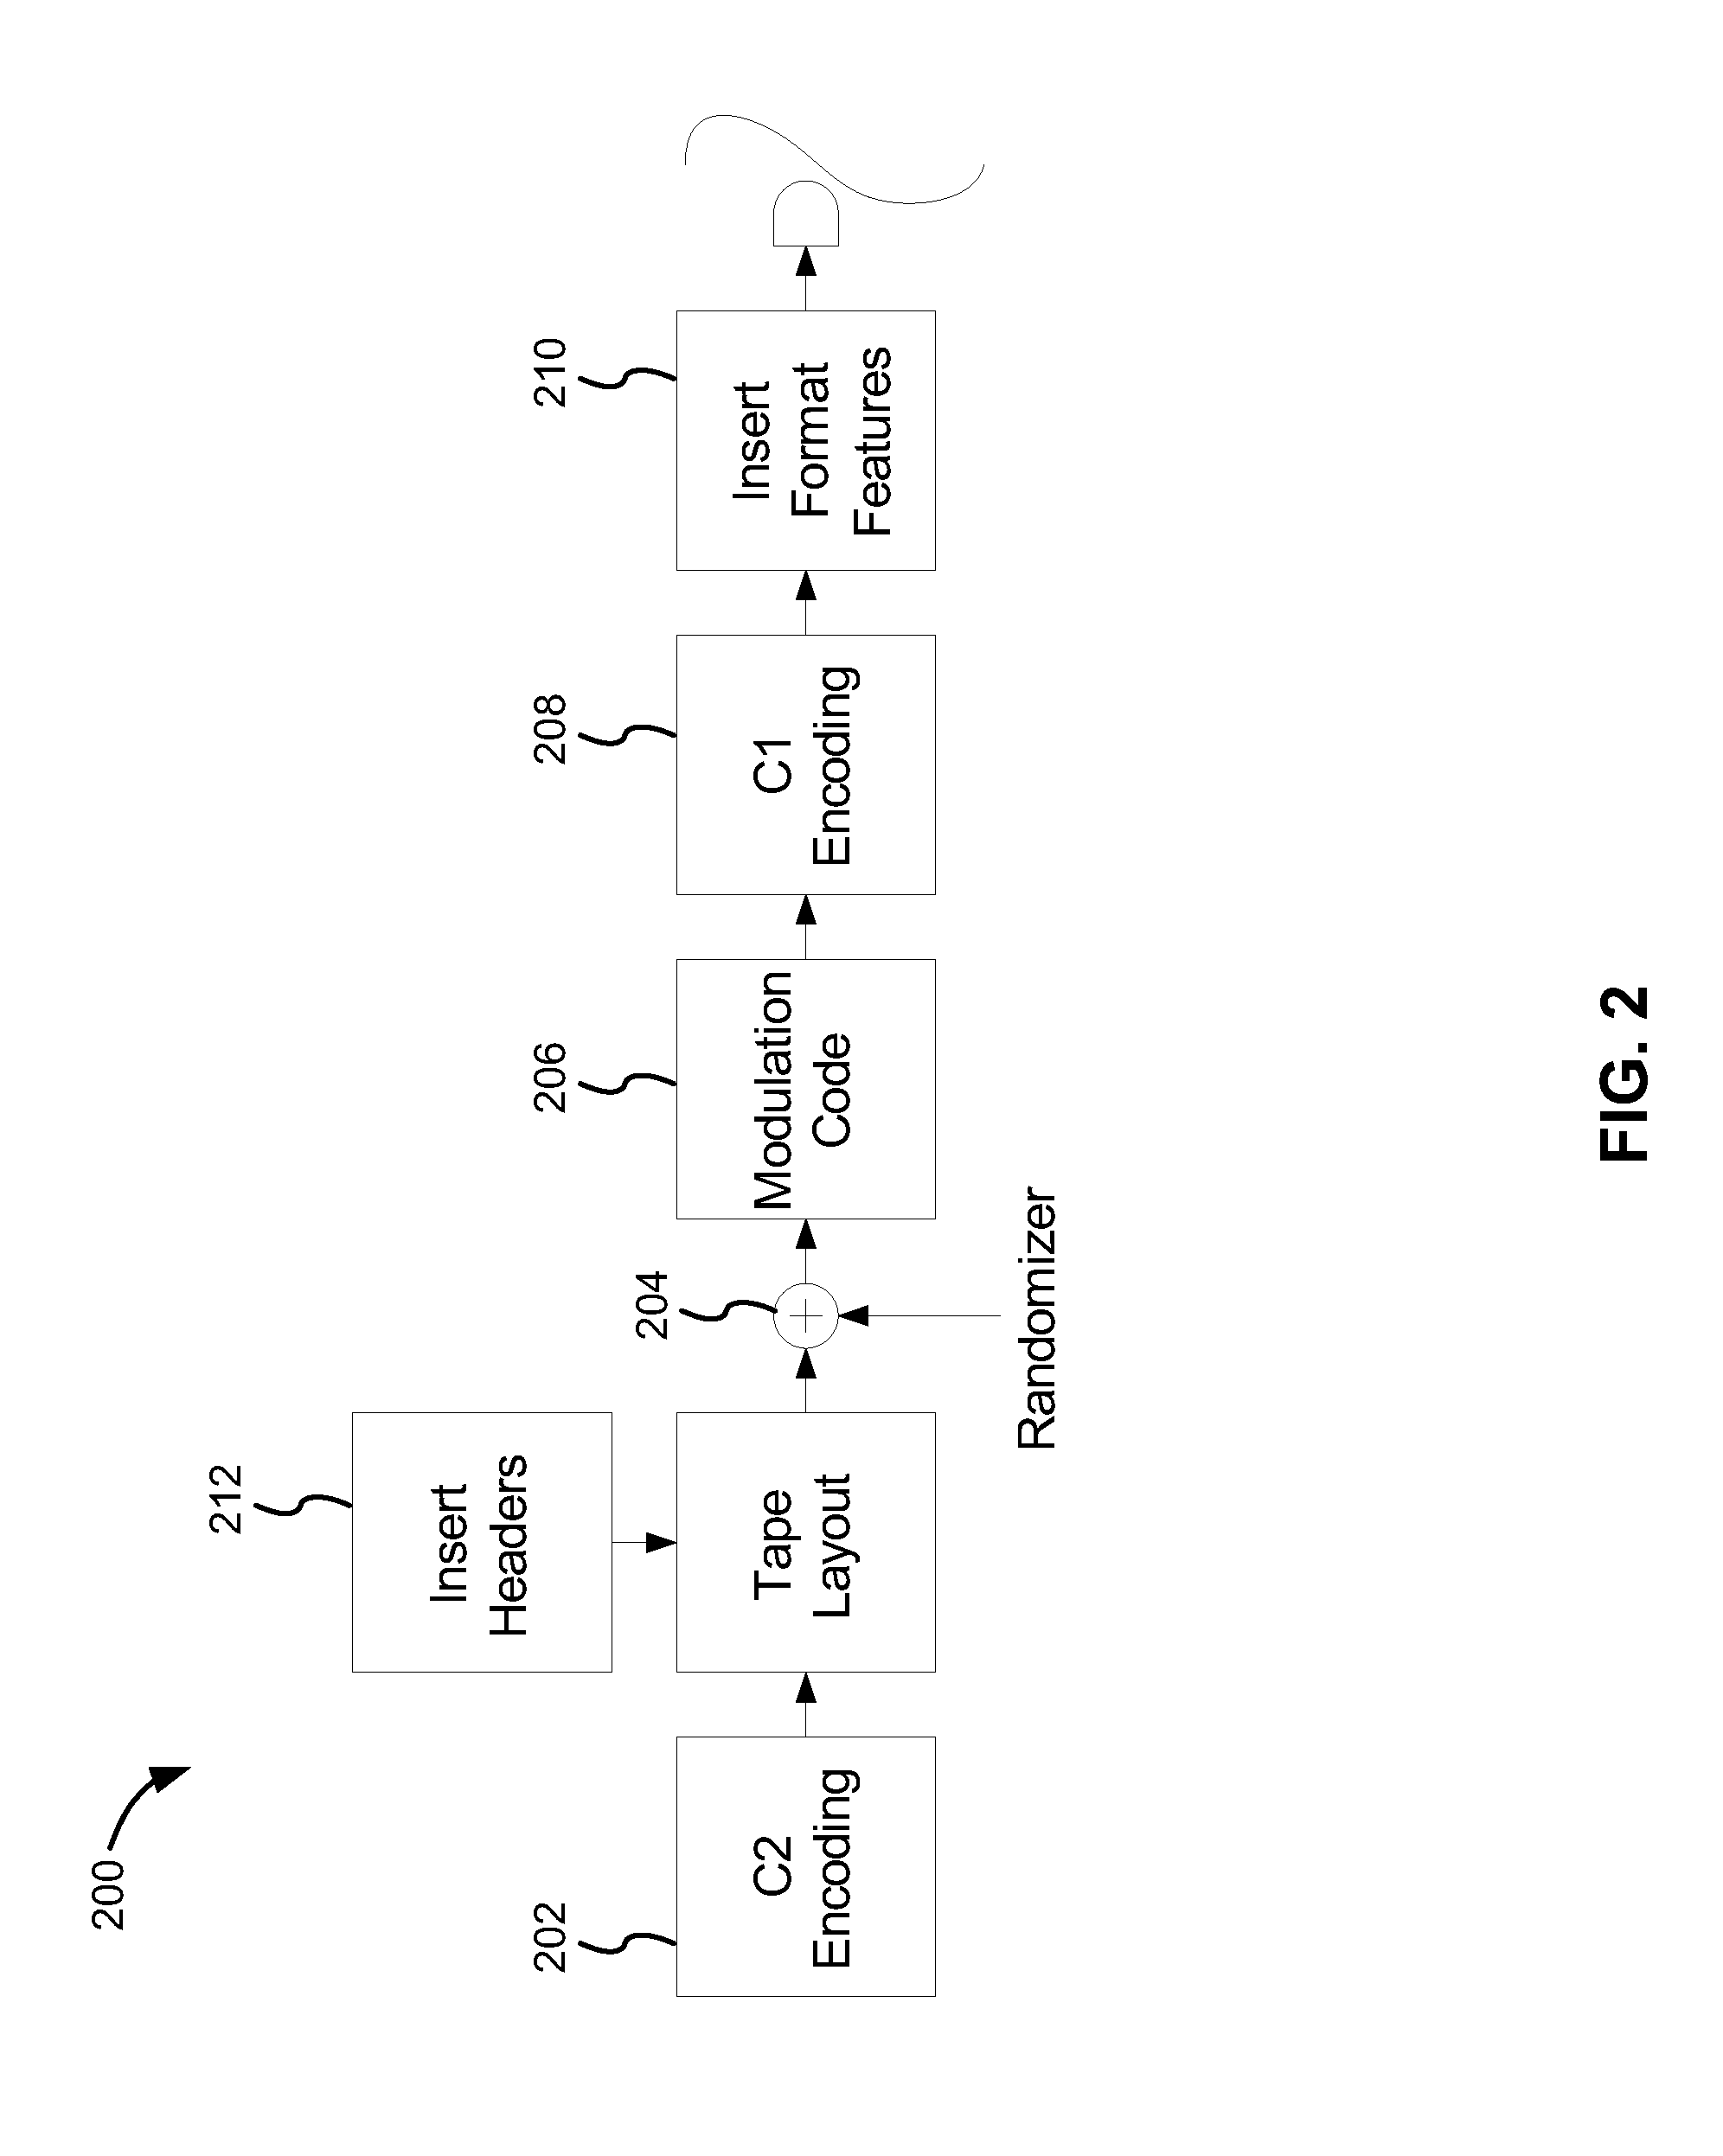 Magnetic tape recording in data format using an efficient reverse concatenated modulation code